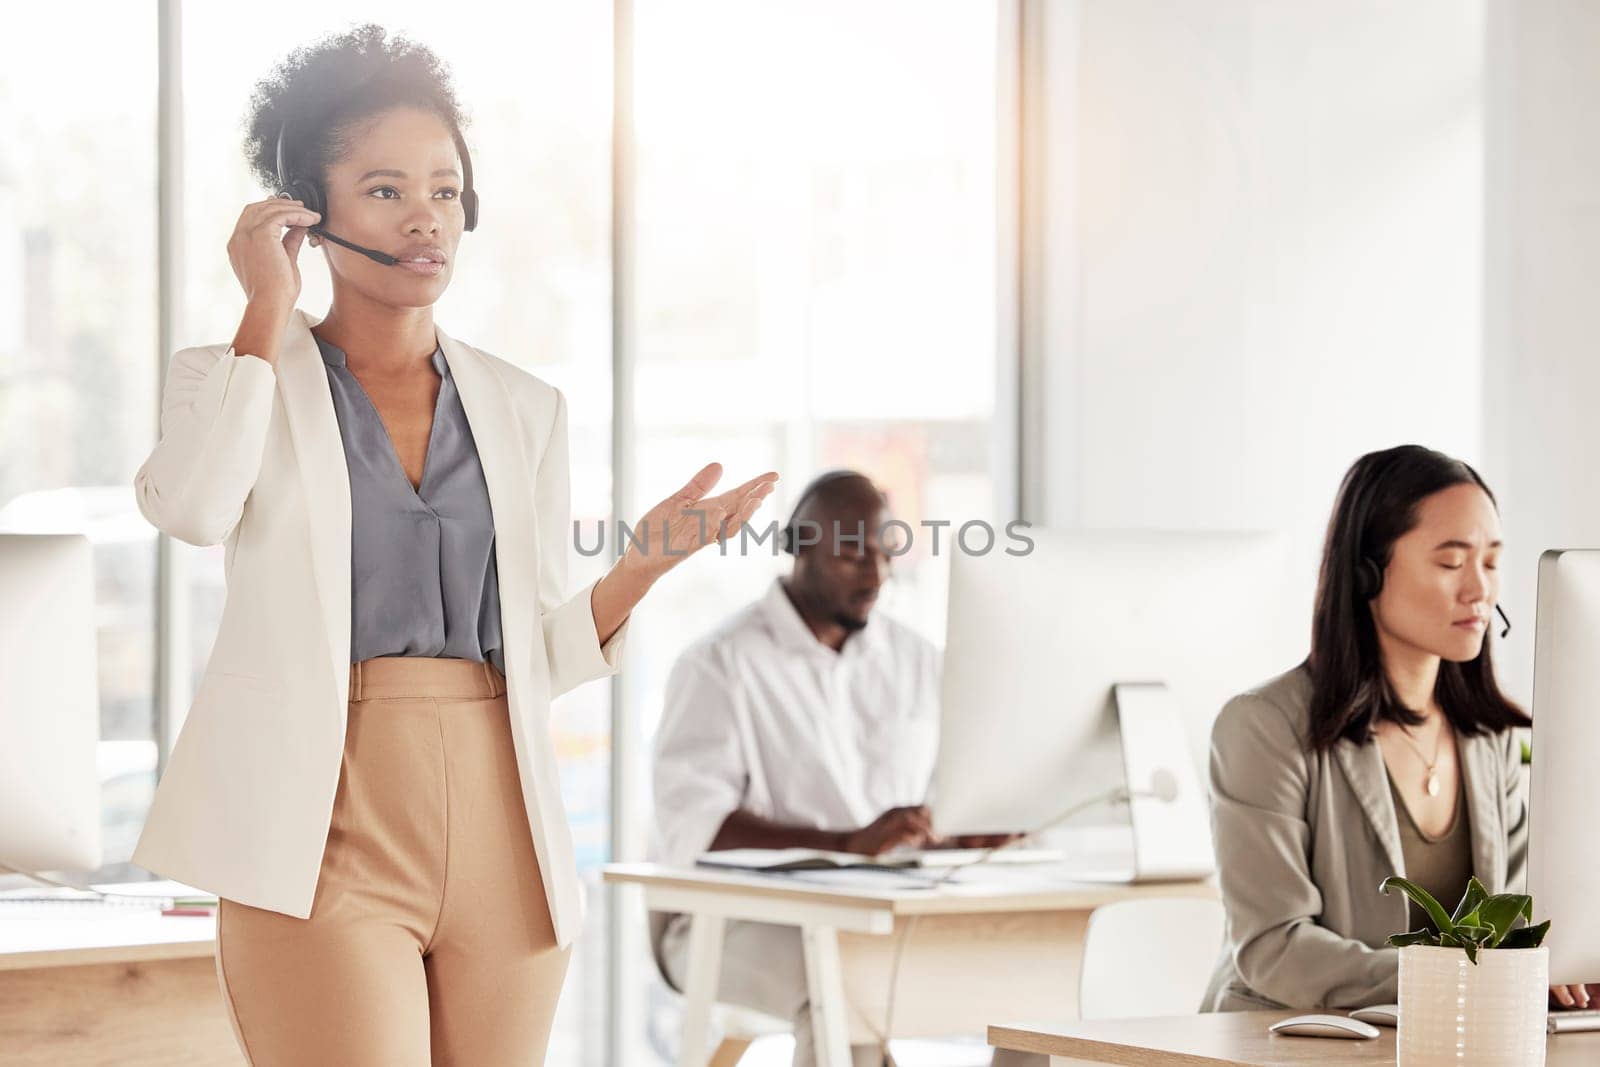 Call center, black woman and business communication in office, coworking sales agency and customer service. Female telemarketing agent talking on headset for help, crm advisory and telecom support.